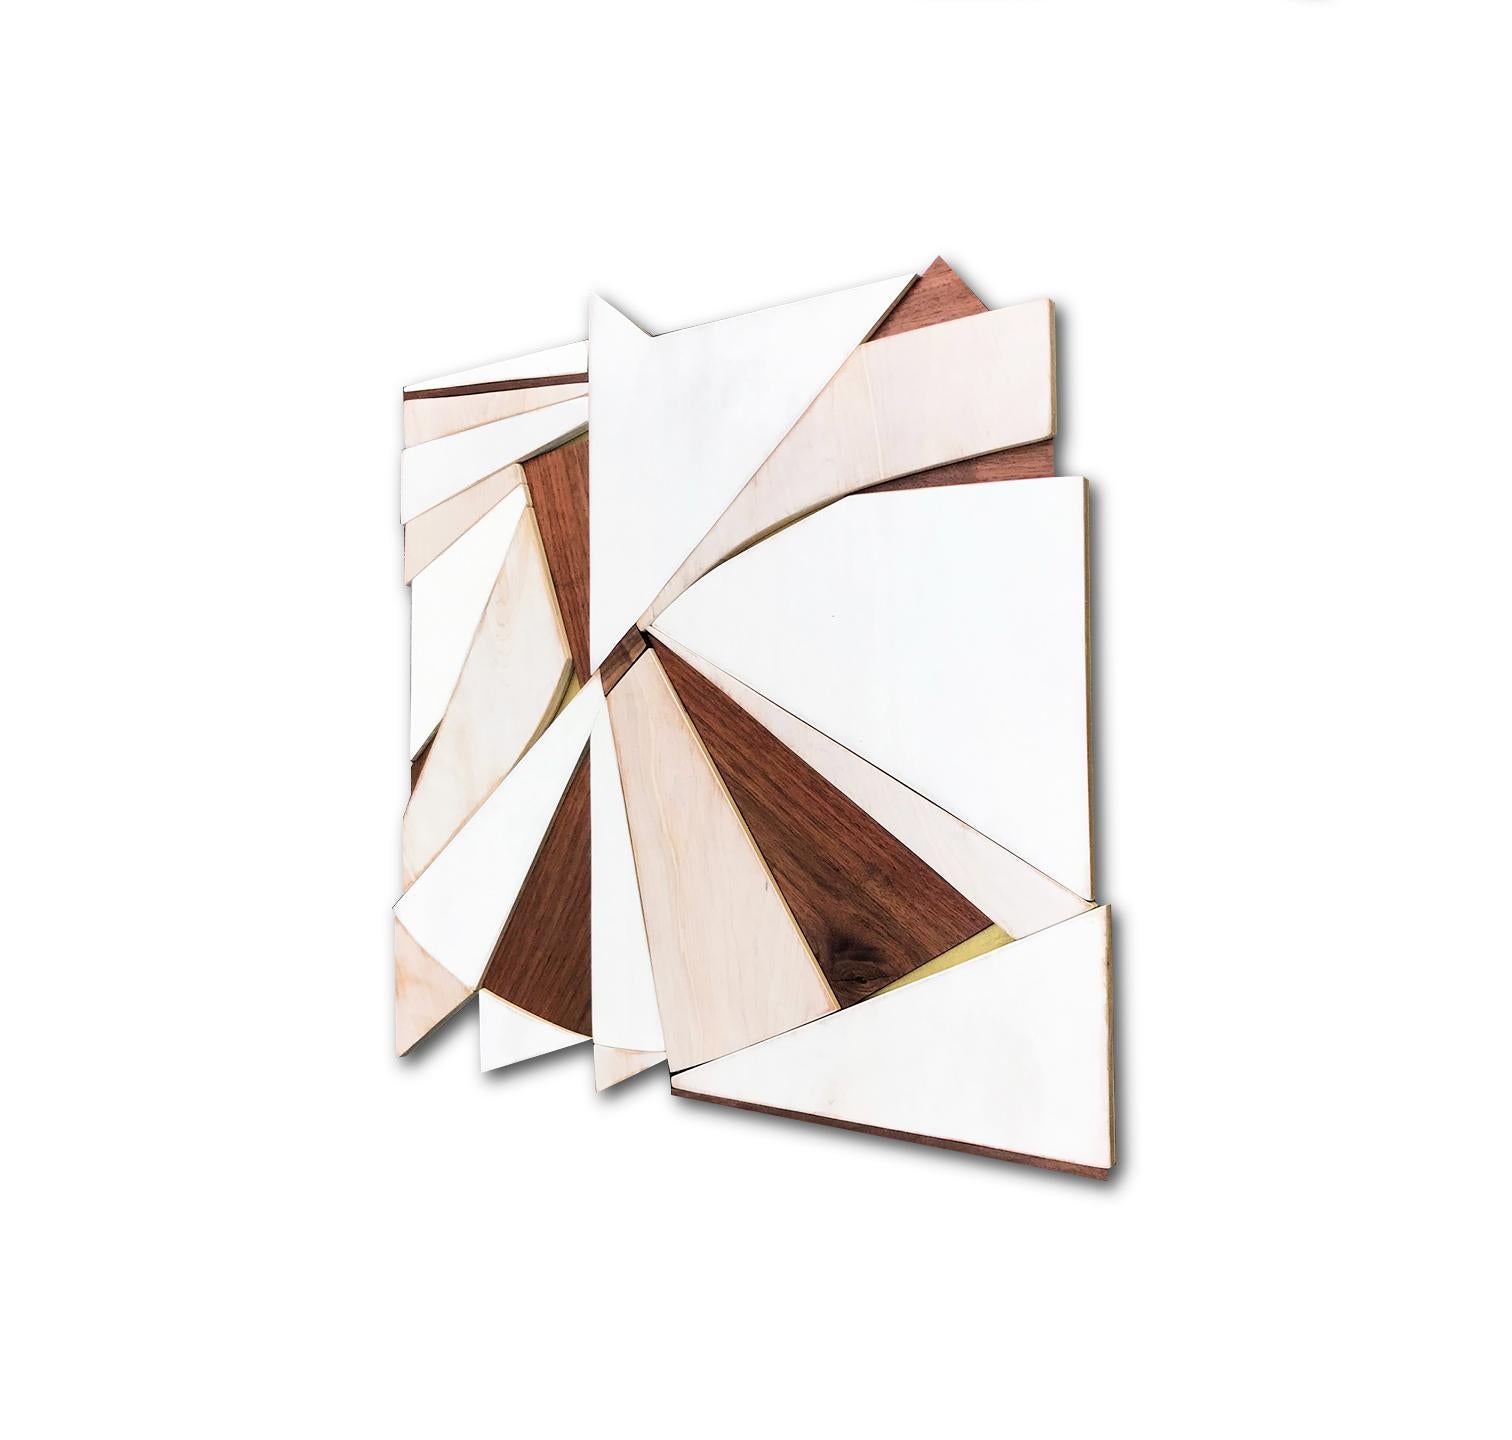 
Tarkka is an aggressive, angular minimalist, monochromatic contemporary wall sculpture. It is constructed with birch panels, acrylic washes, walnut hardwood and completed with a semi-gloss lacquer distressed finish. The acrylic wash allows the wood